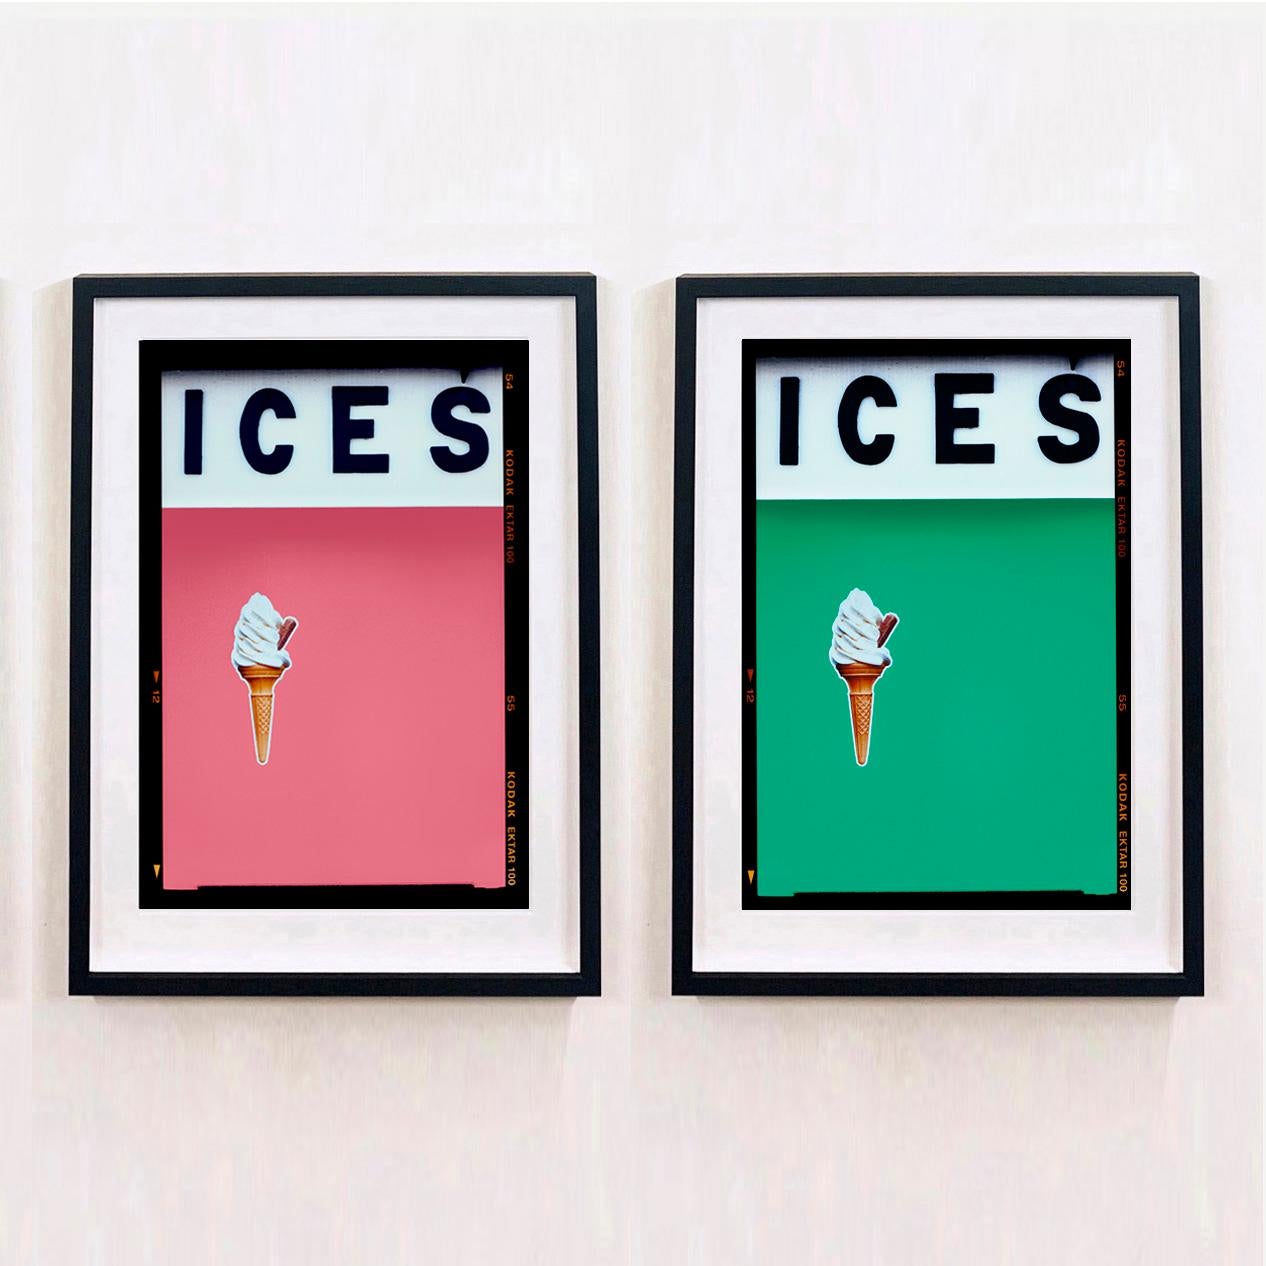 Ices (Coral), Bexhill-on-Sea - British seaside color photography For Sale 1